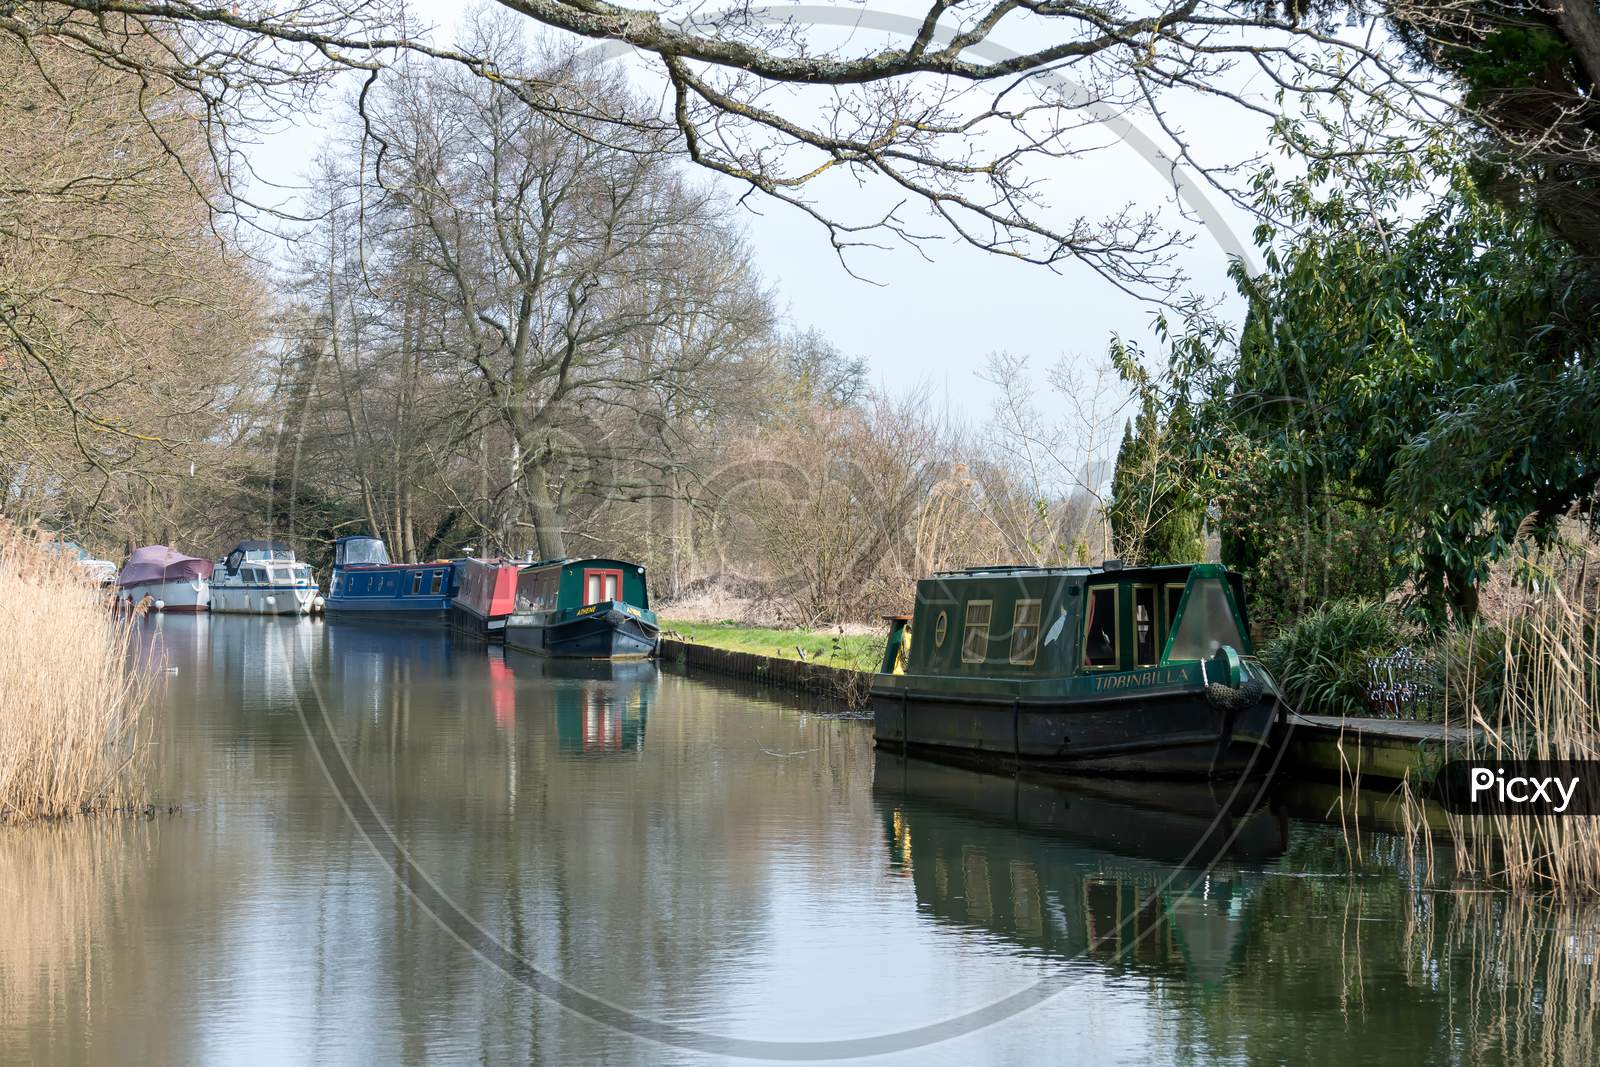 Narrow Boats On The River Wey Navigations Canal